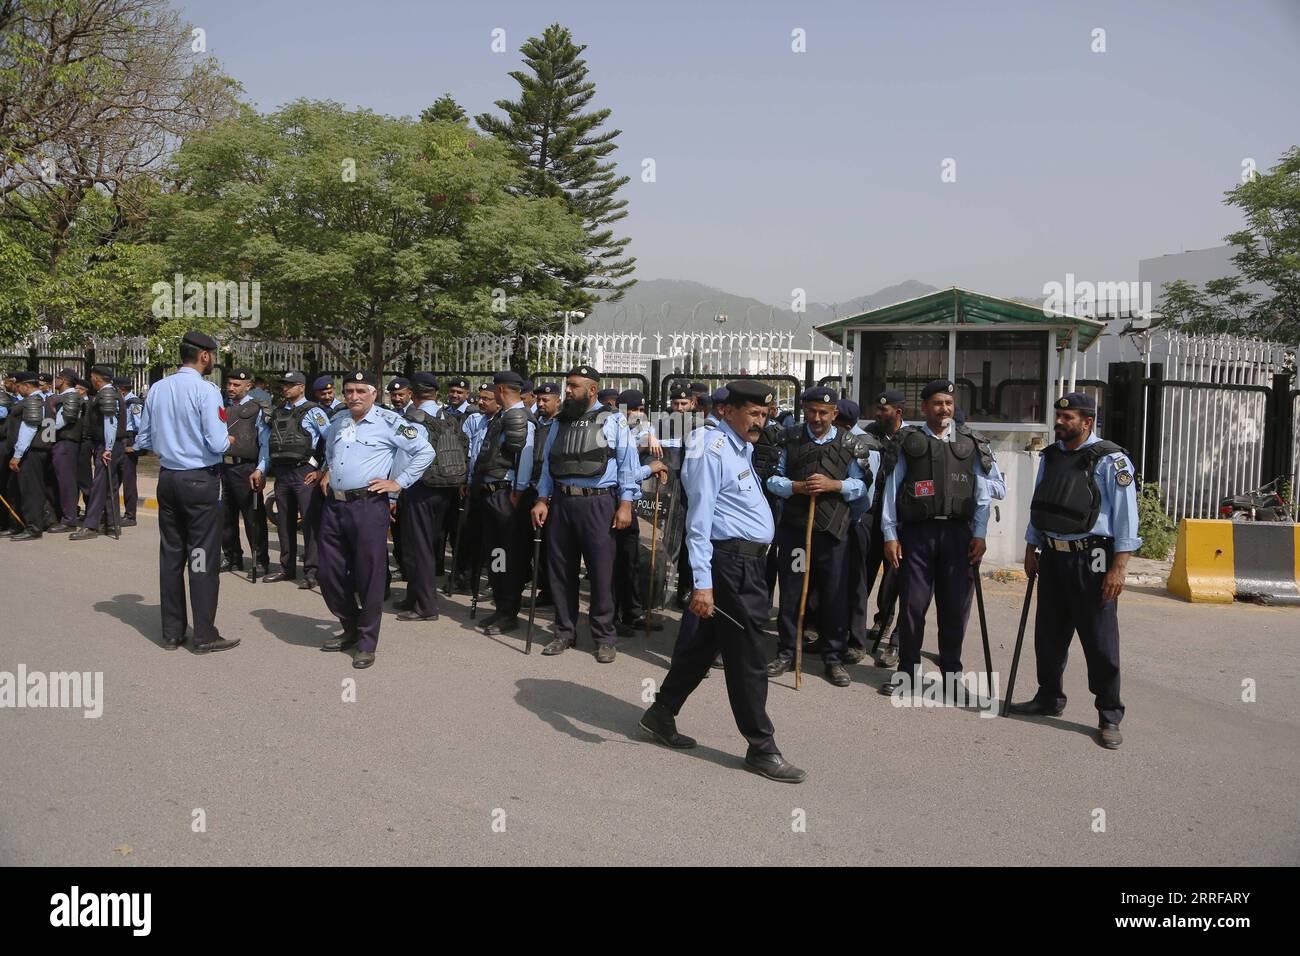 220409 -- ISLAMABAD, April 9, 2022 -- Security personnel stand guard outside the National Assembly building in Islamabad, capital of Pakistan, on April 9, 2022. The no-confidence motion filed by an opposition alliance against Pakistani Prime Minister Imran Khan succeeded on the early morning of April 10 after a majority of members of the National Assembly voted against him, said an official.  PAKISTAN-ISLAMABAD-NO-CONFIDENCE VOTE AhmadxKamal PUBLICATIONxNOTxINxCHN Stock Photo